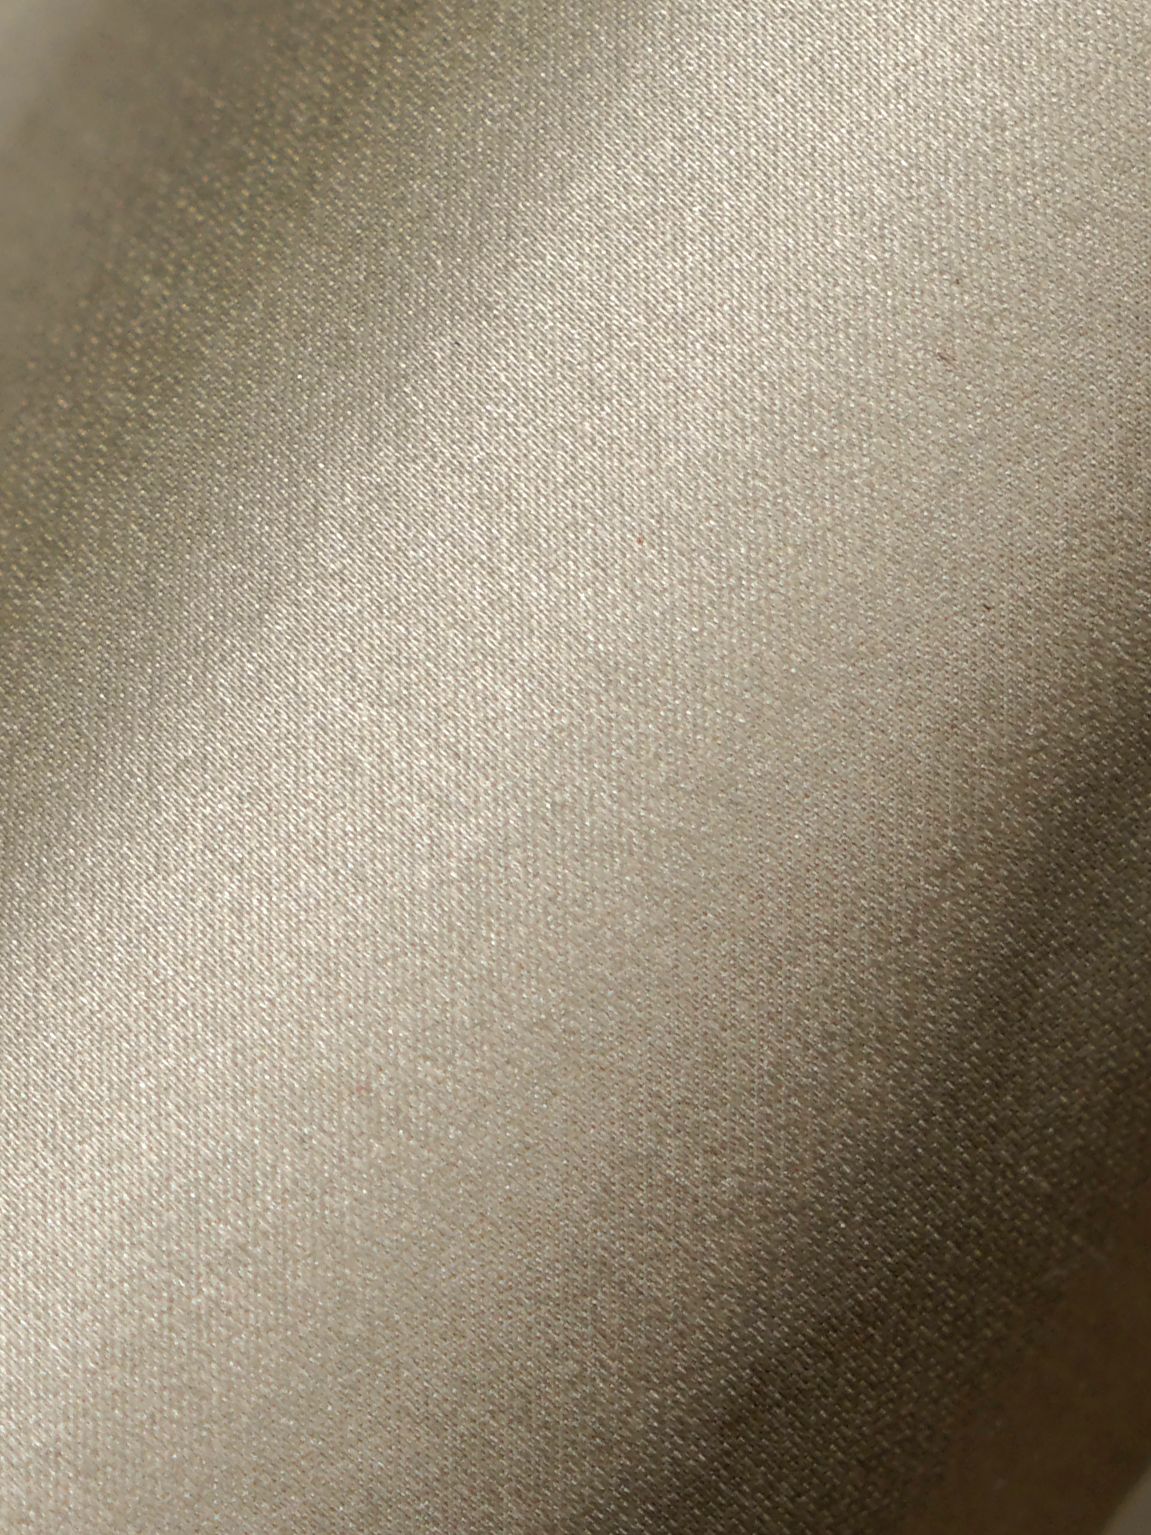 Academy fabric in bisque color - pattern number SC 000236288 - by Scalamandre in the Scalamandre Fabrics Book 1 collection